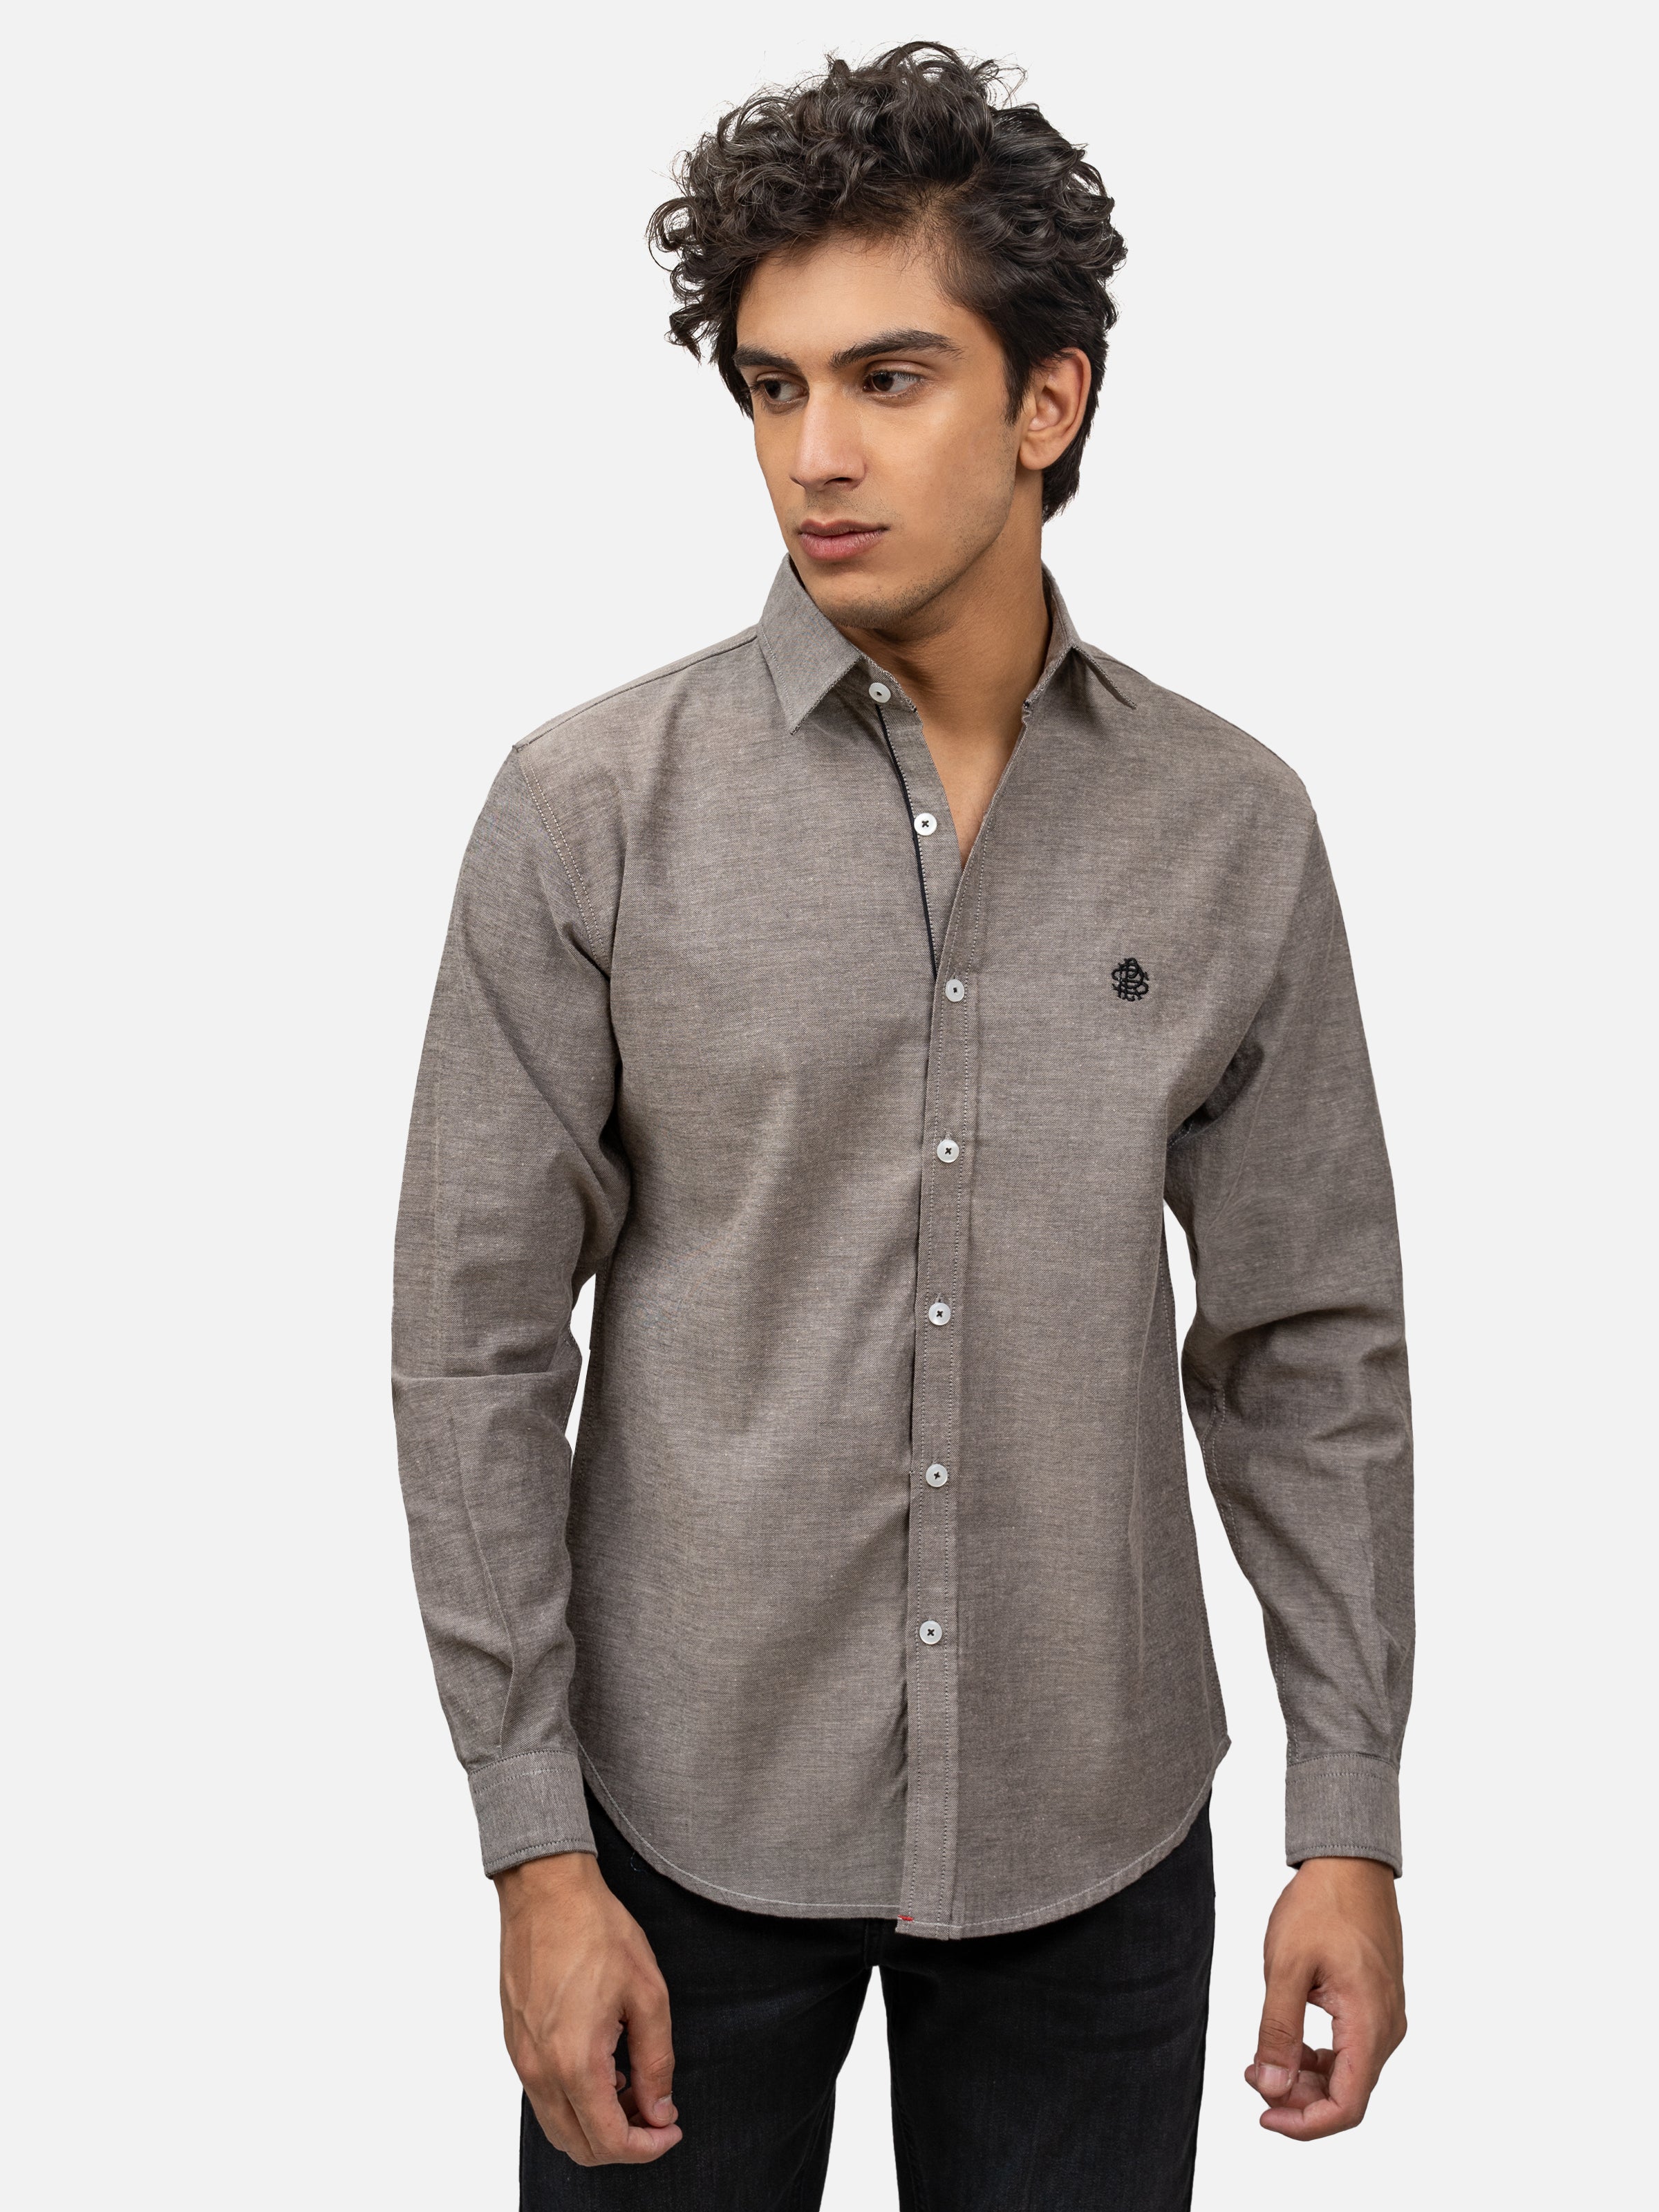 CASUAL SHIRT FULL SLEEVES SMART FIT GREY